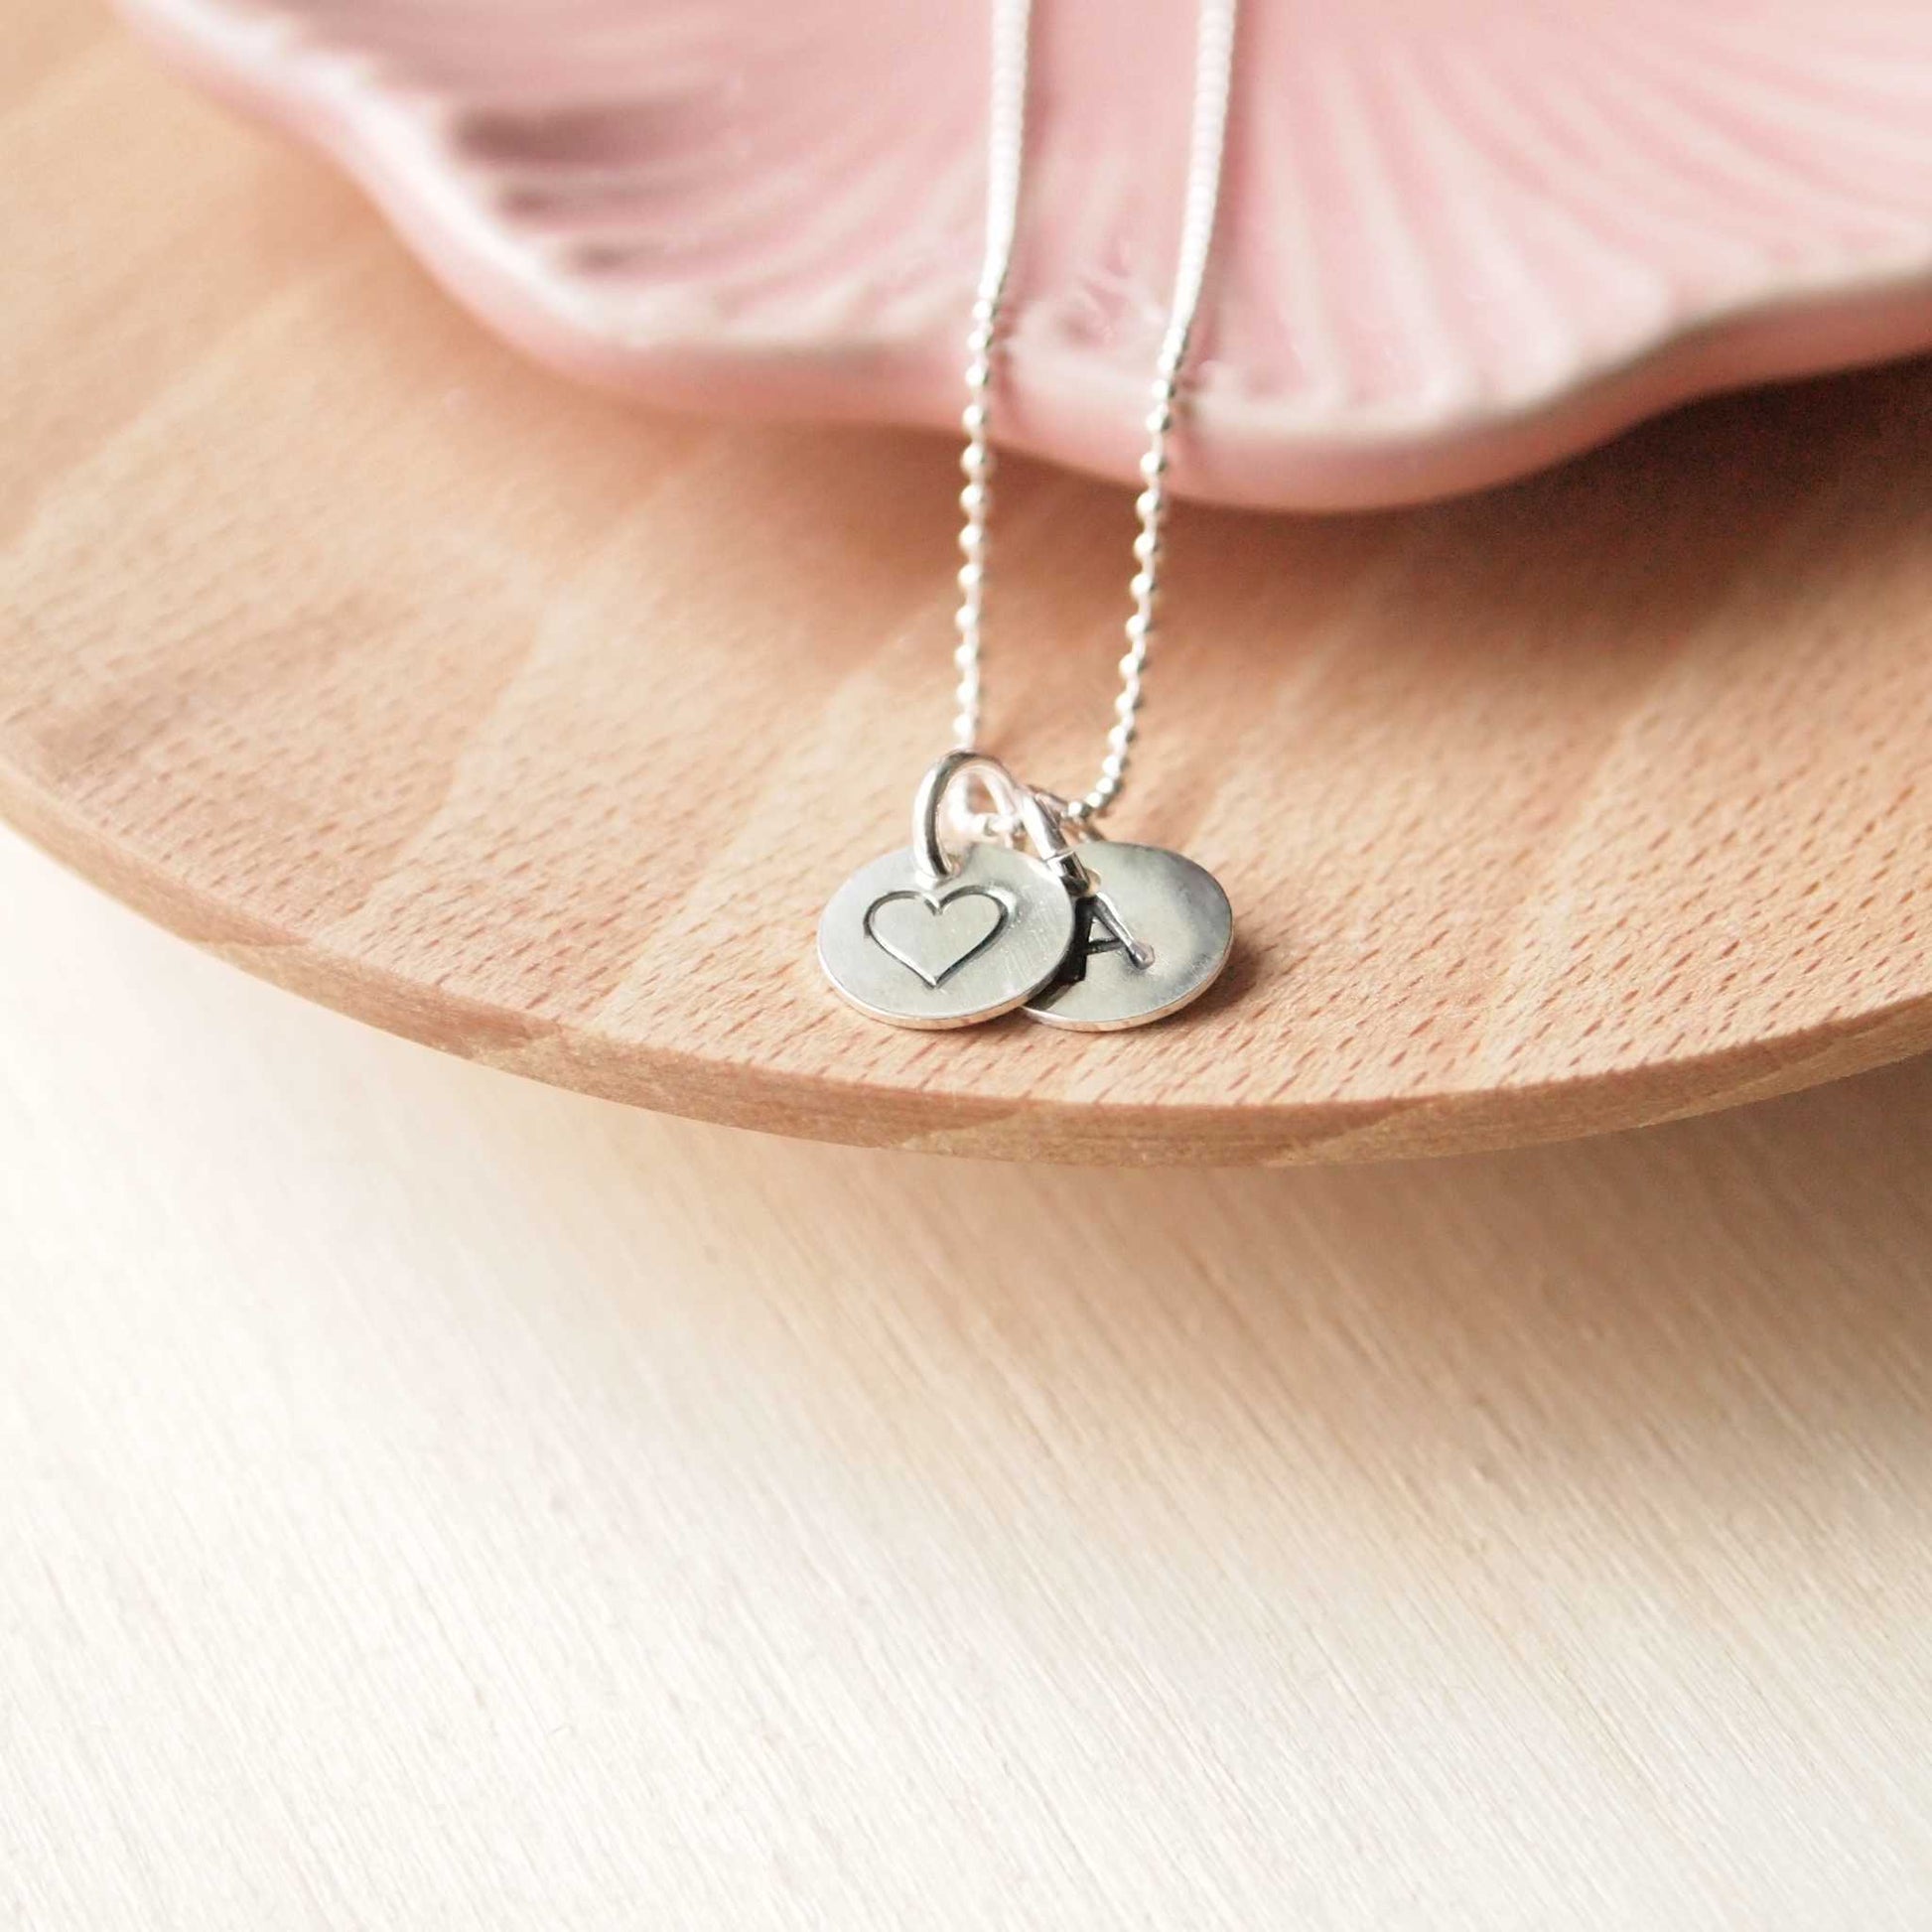 Silver letter and heart token charms on a simple silver chain. Subtle and understated necklace handmade by maram jewellery in UK